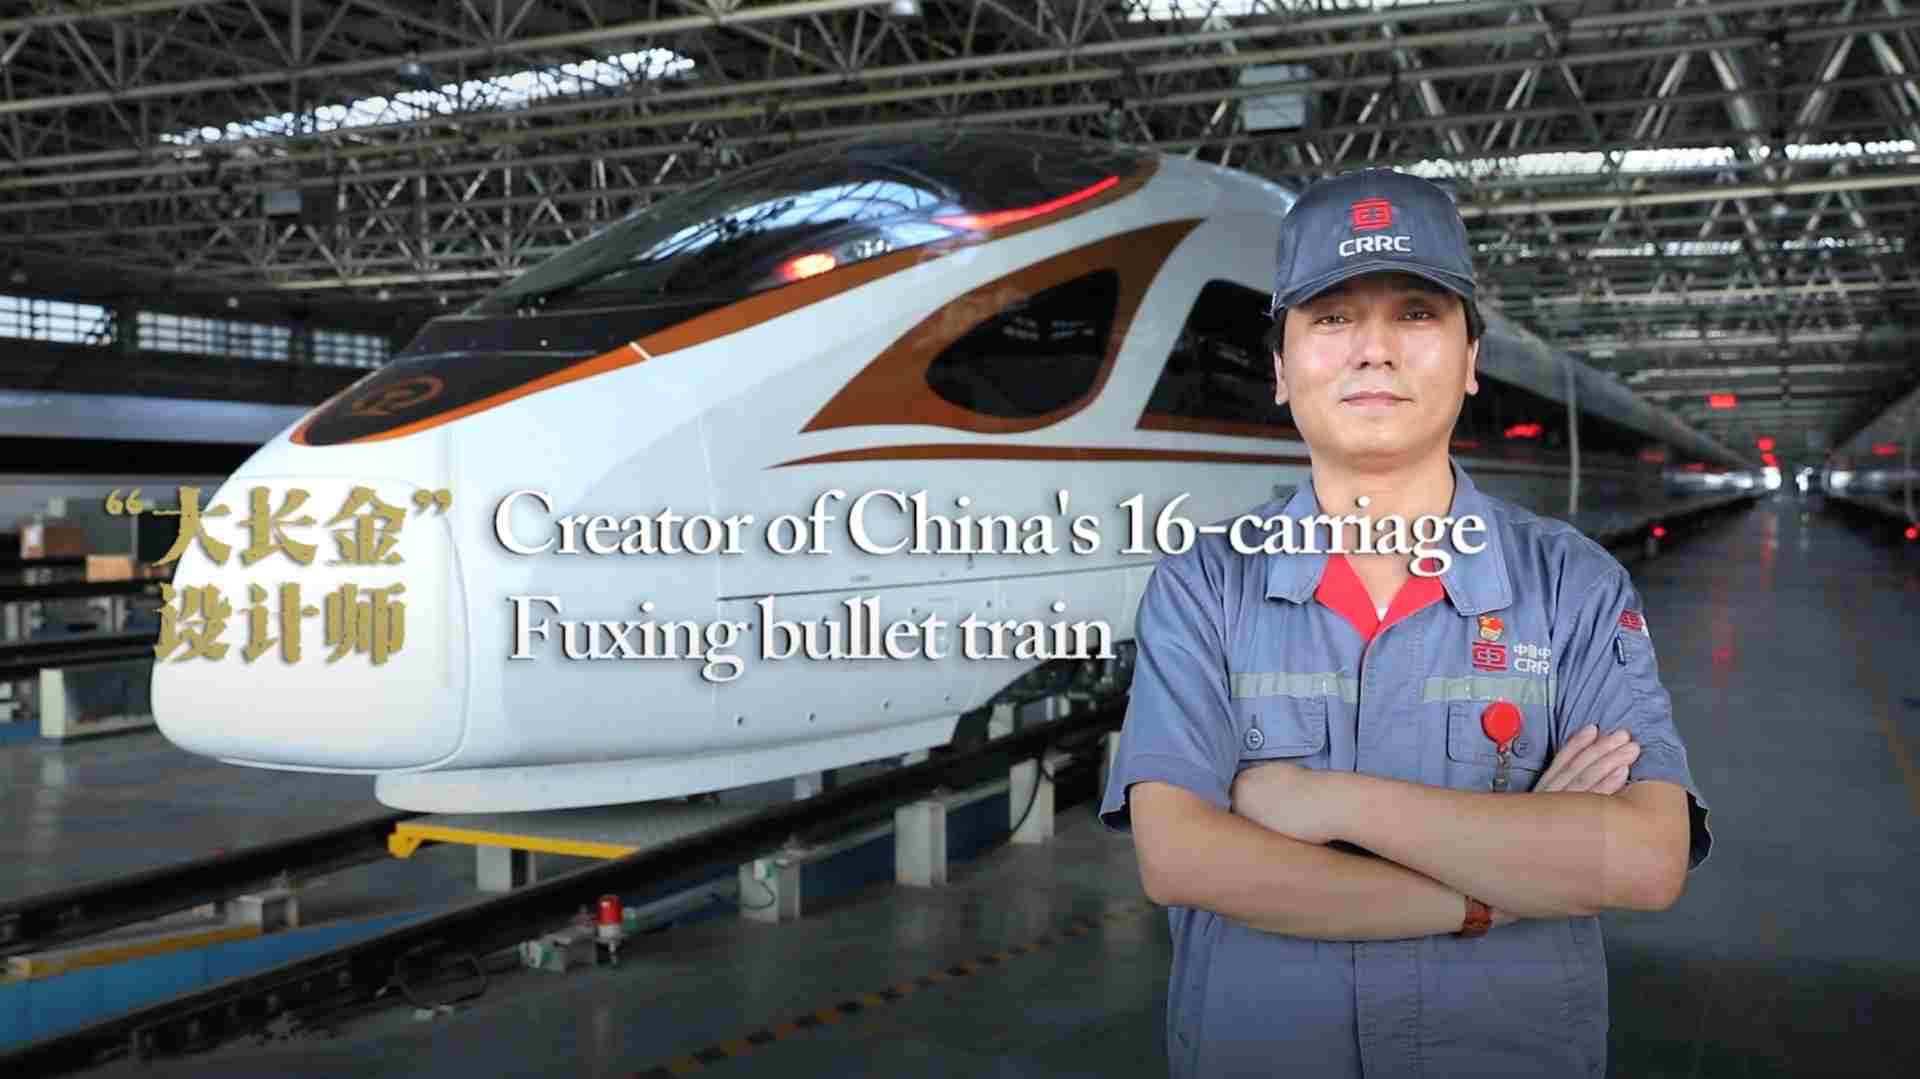 Meet the creator of Chinas 16-carriage Fuxing bullet train